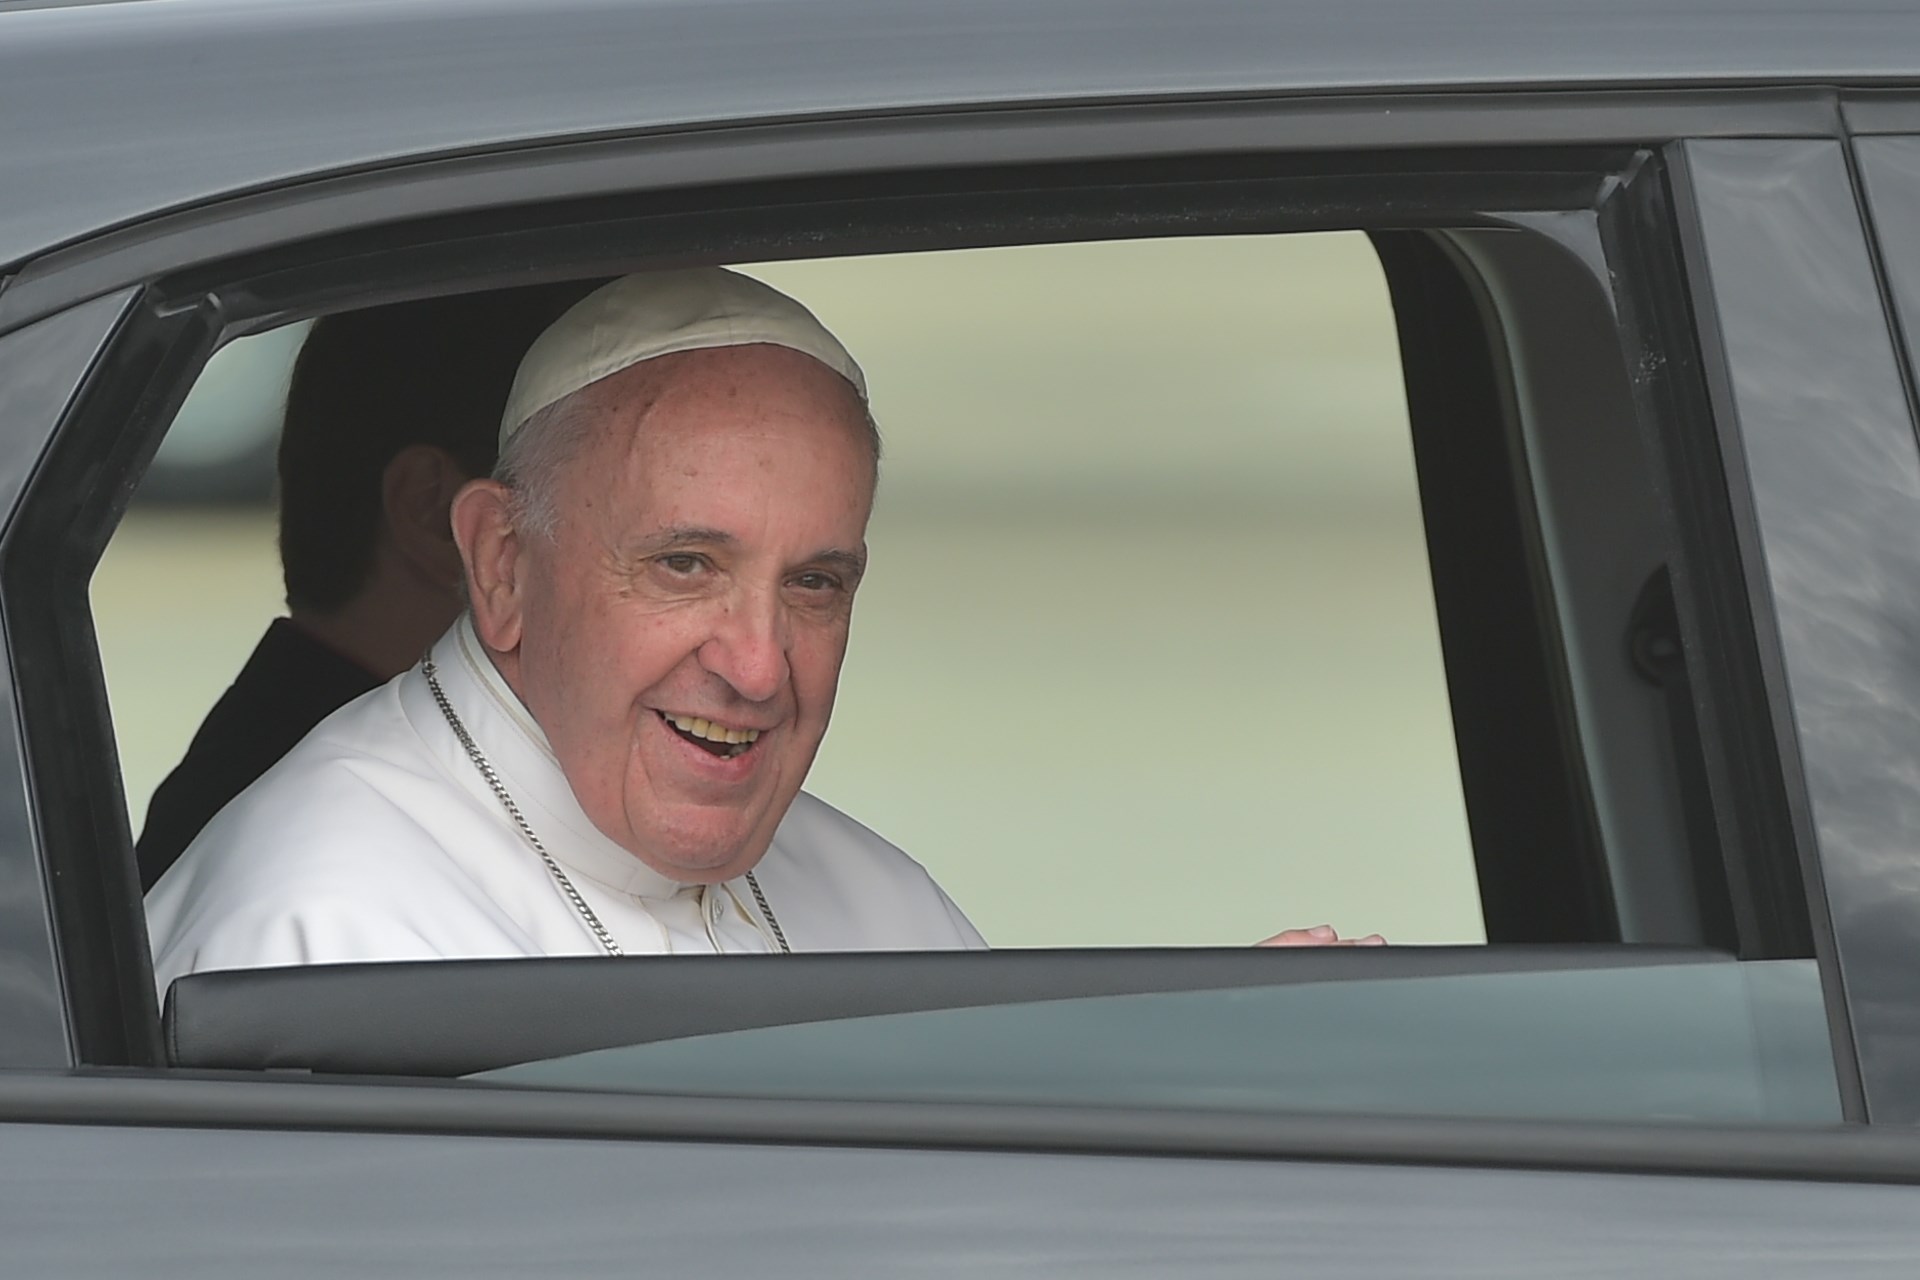 PHOTO: Pope Francis looks out of the window of his automobile after after his arrival at Andrews Air Force Base in Maryland on Sept. 22, 2015.